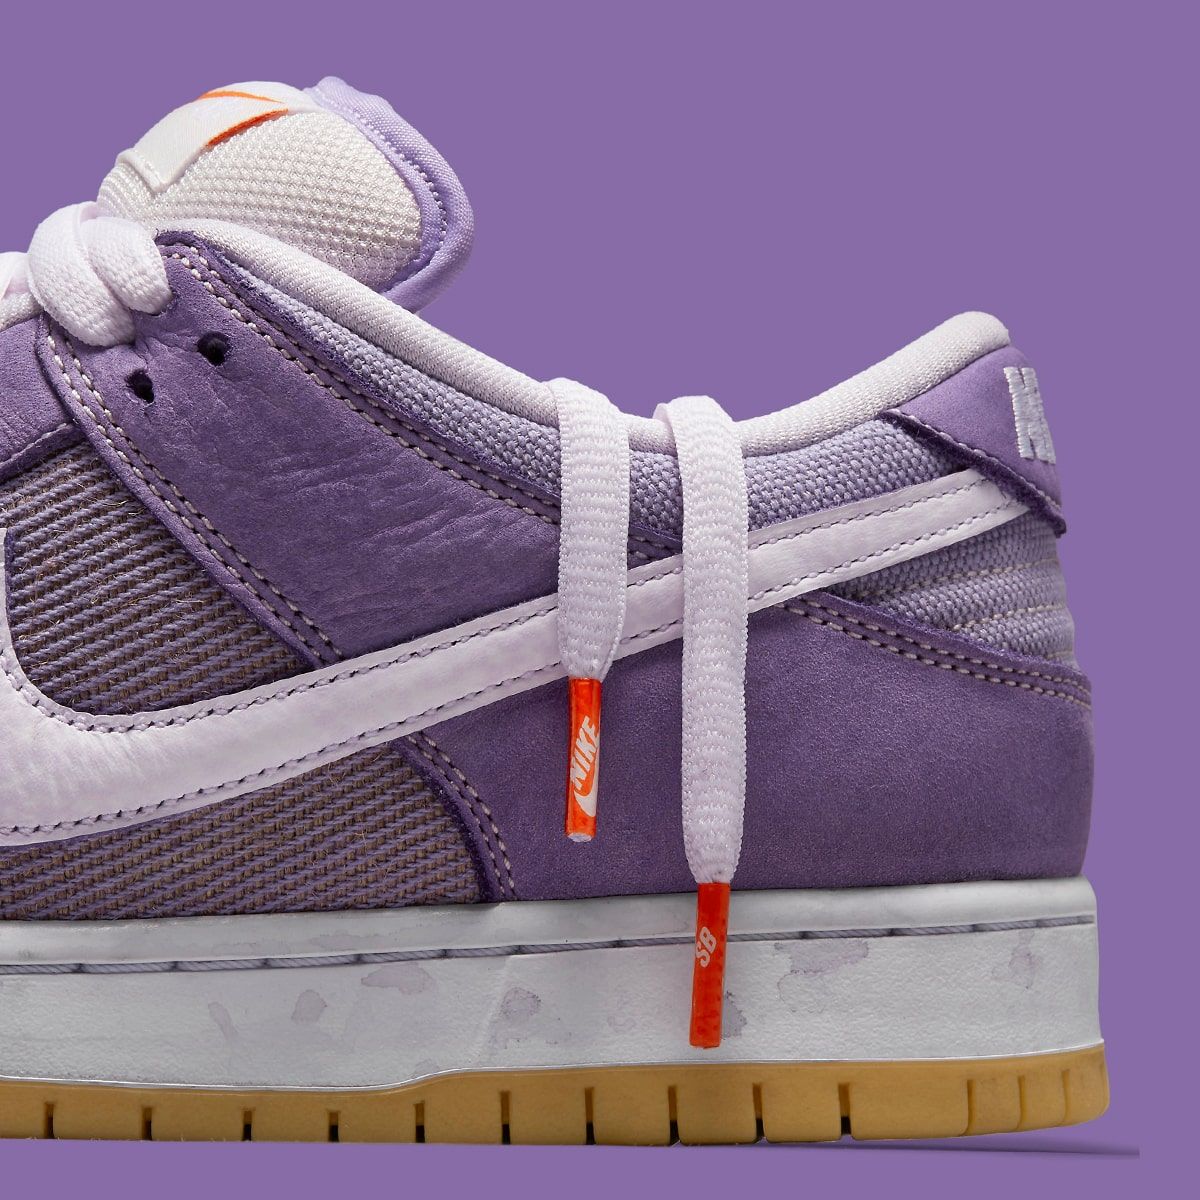 Offical Images // Nike SB Dunk Low "Lilac" | HOUSE OF HEAT